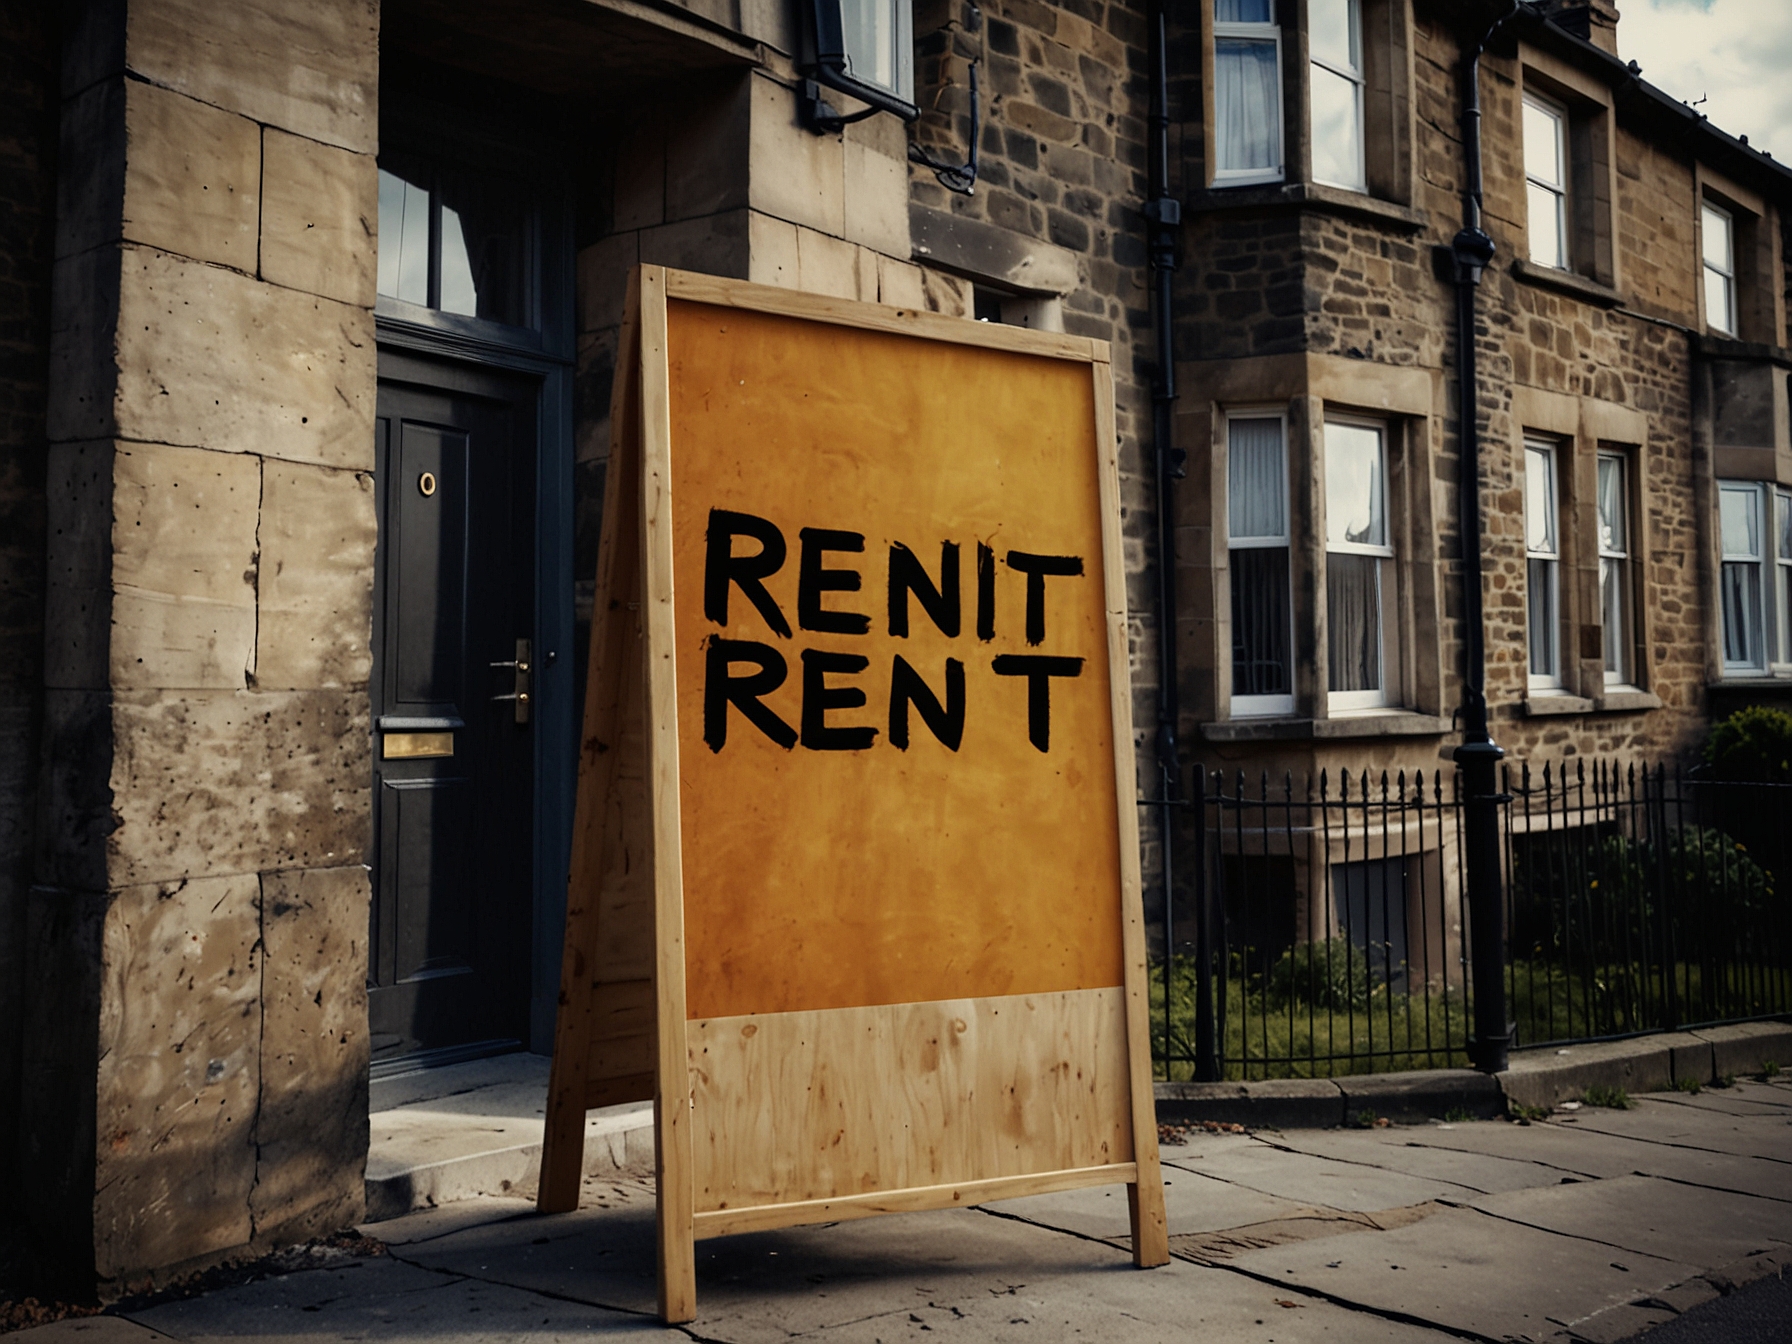 A photo showing a ‘For Rent’ sign in front of a residential building in Scotland, symbolizing the housing market's current state.